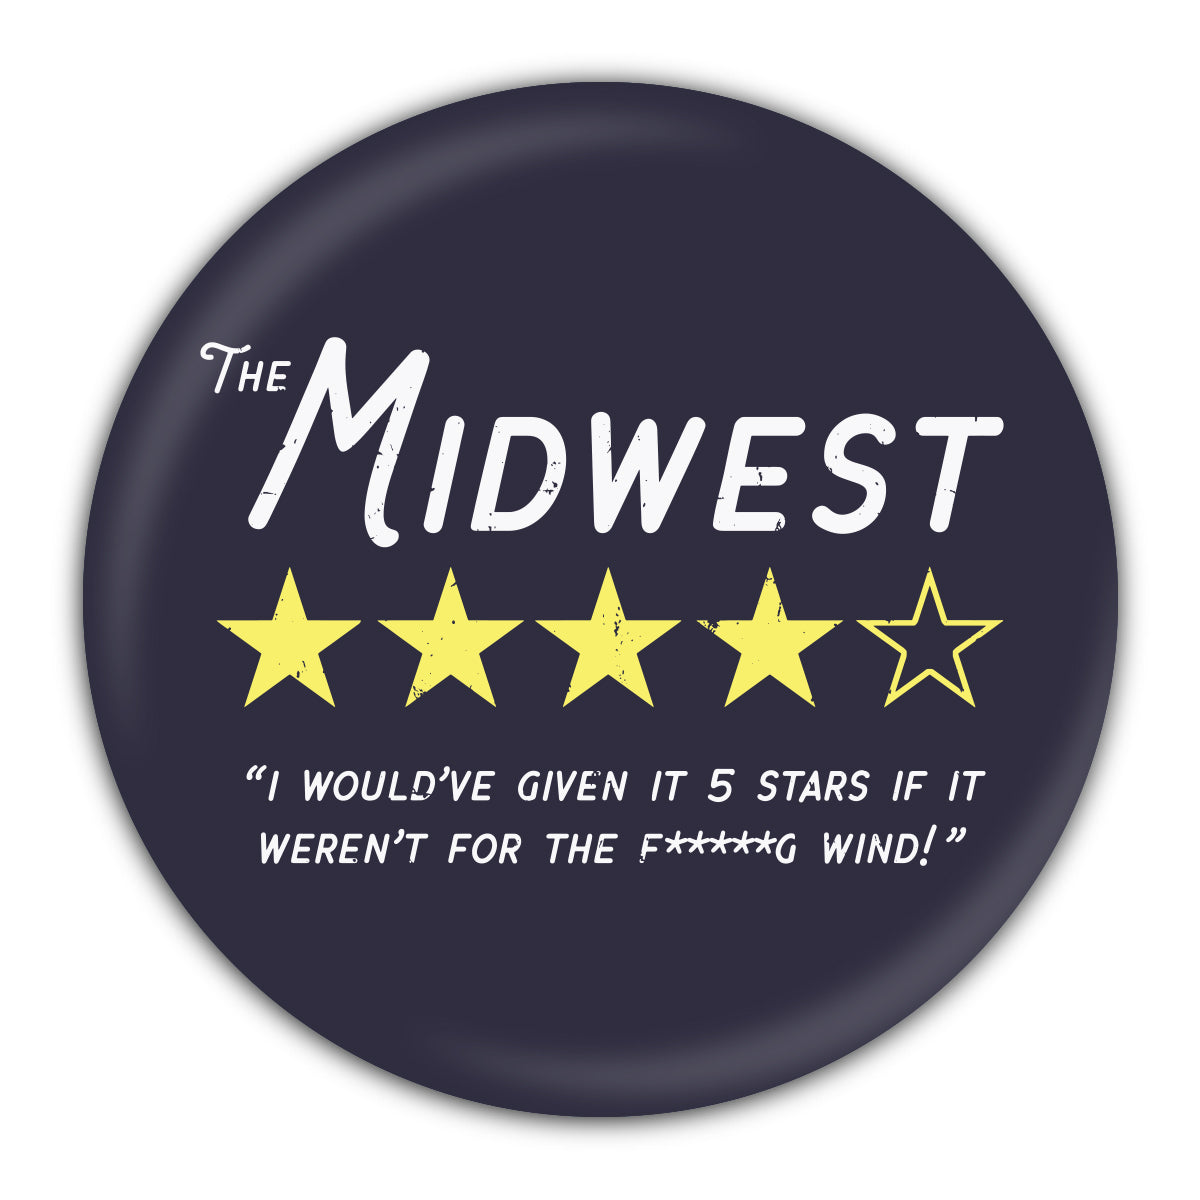 The Midwest Review Round Coaster